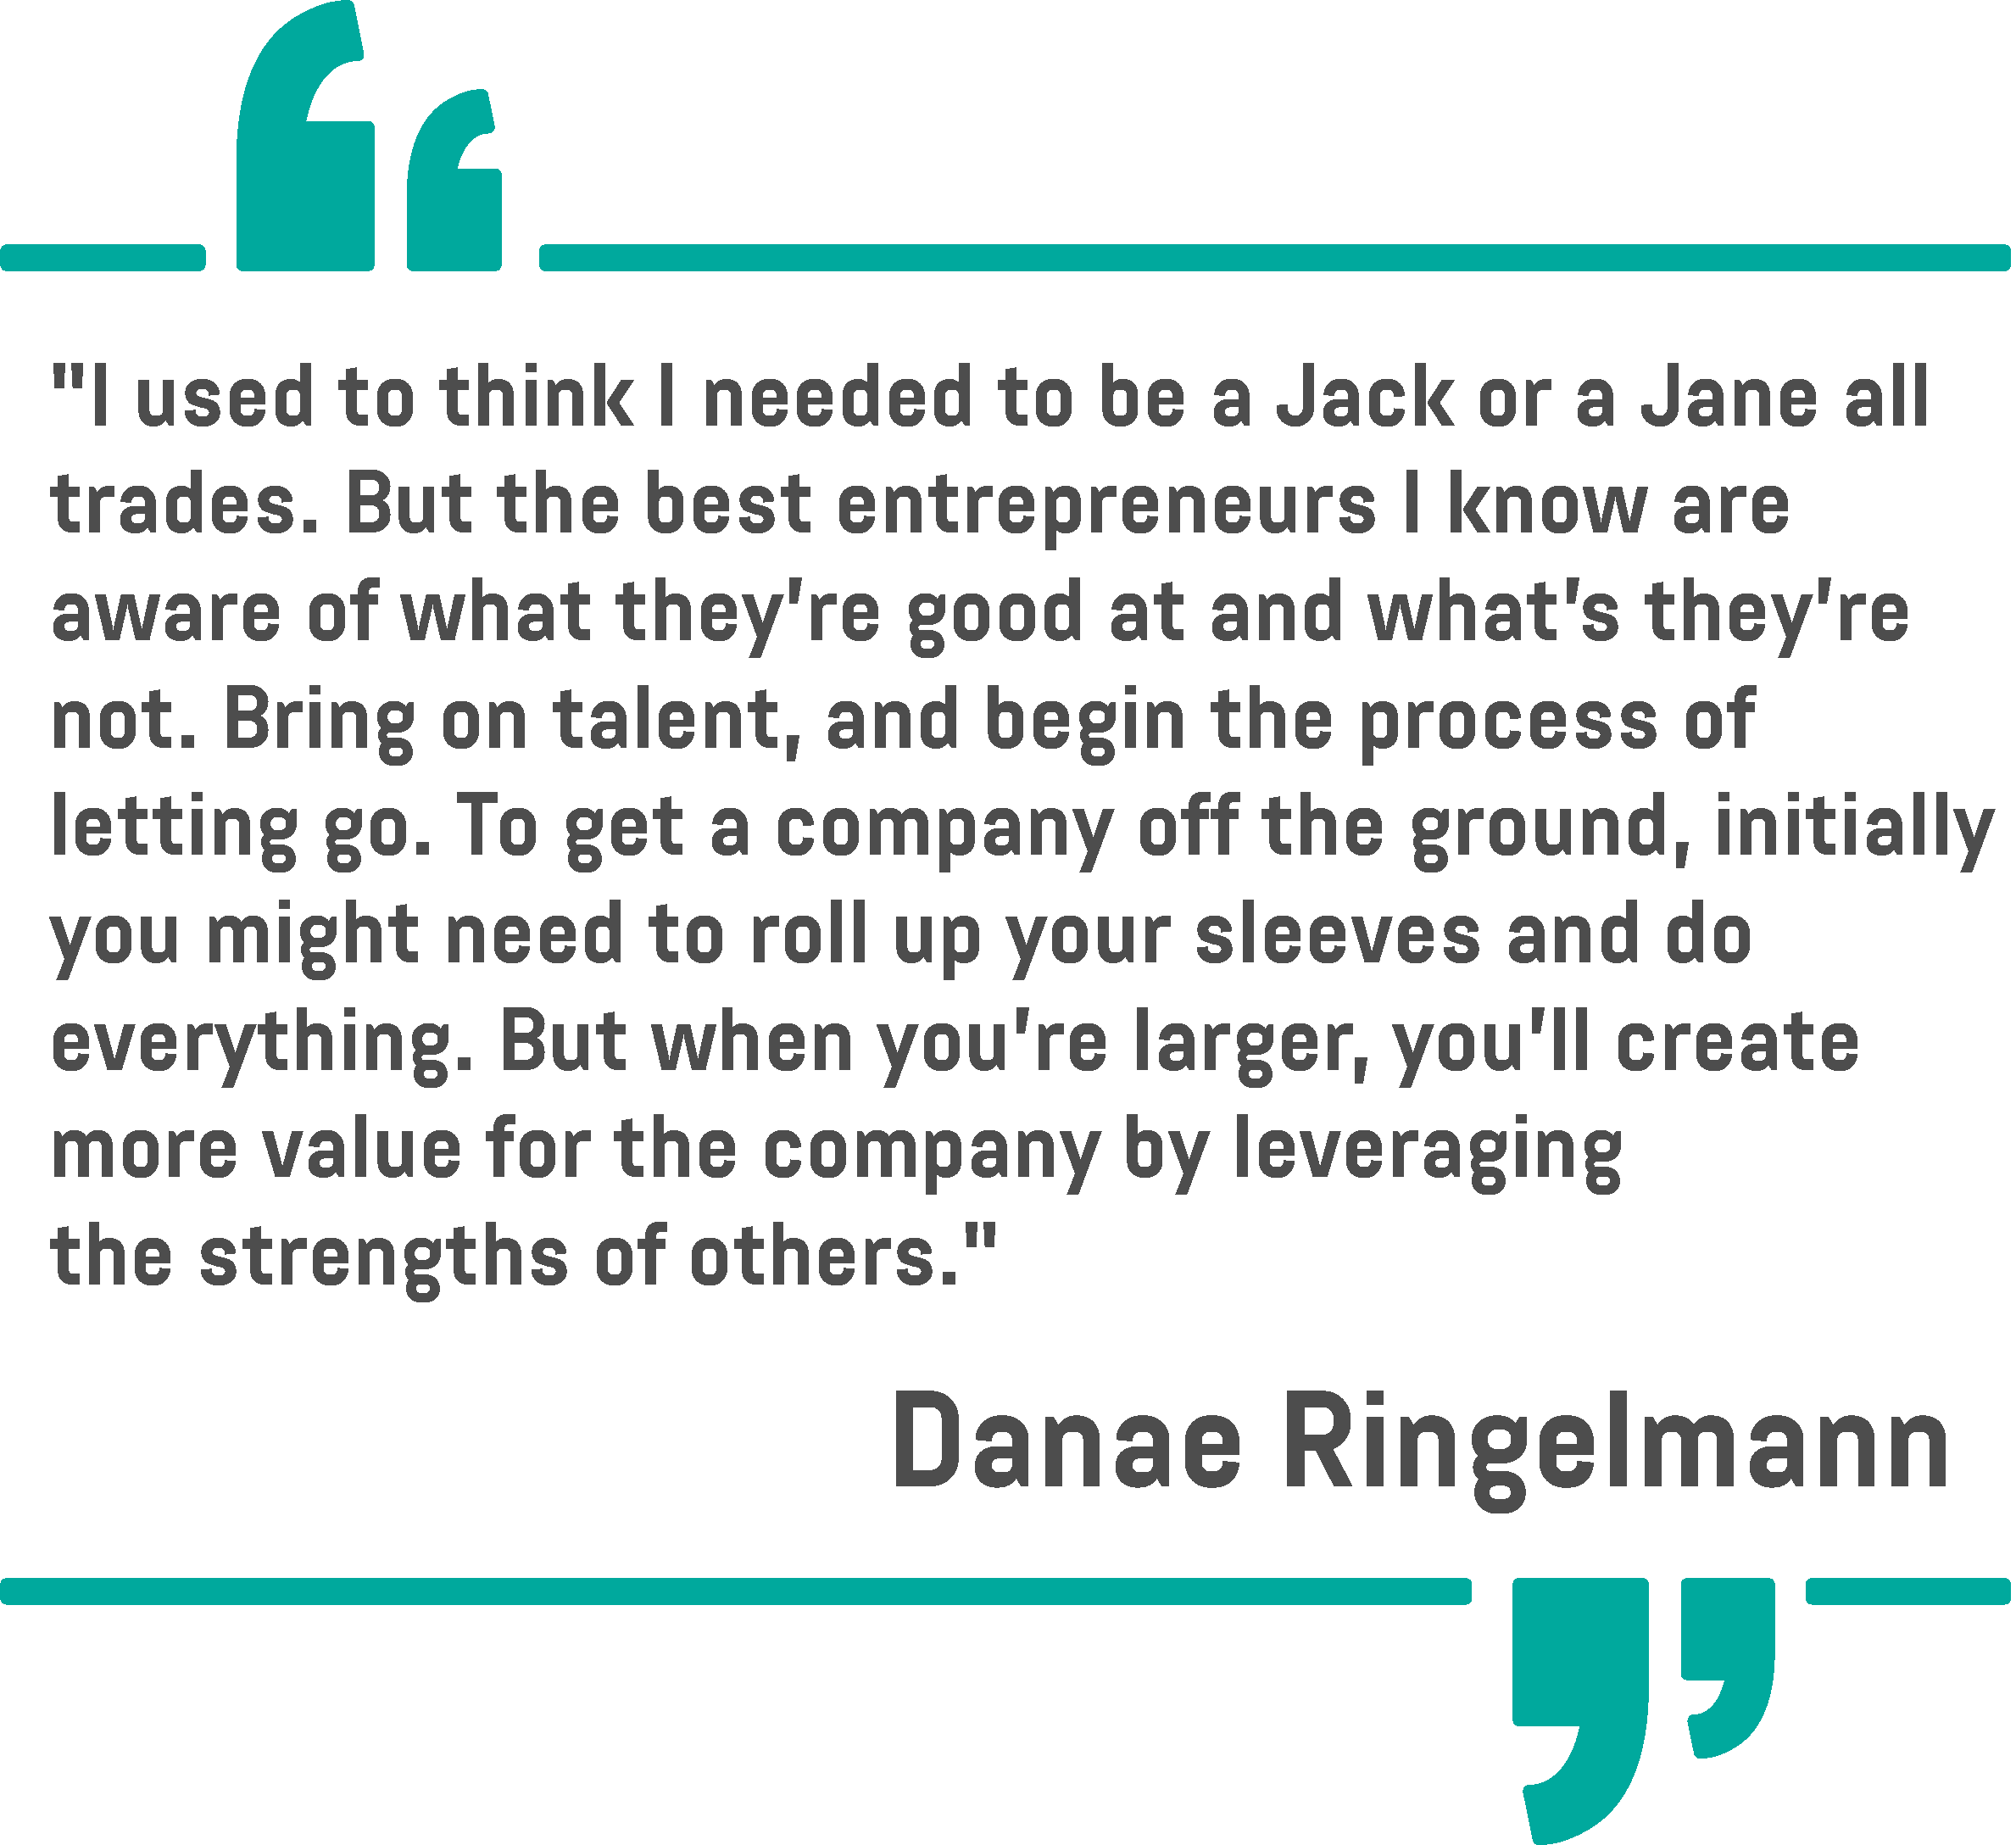 A quote from Danae Ringelmann on a white background